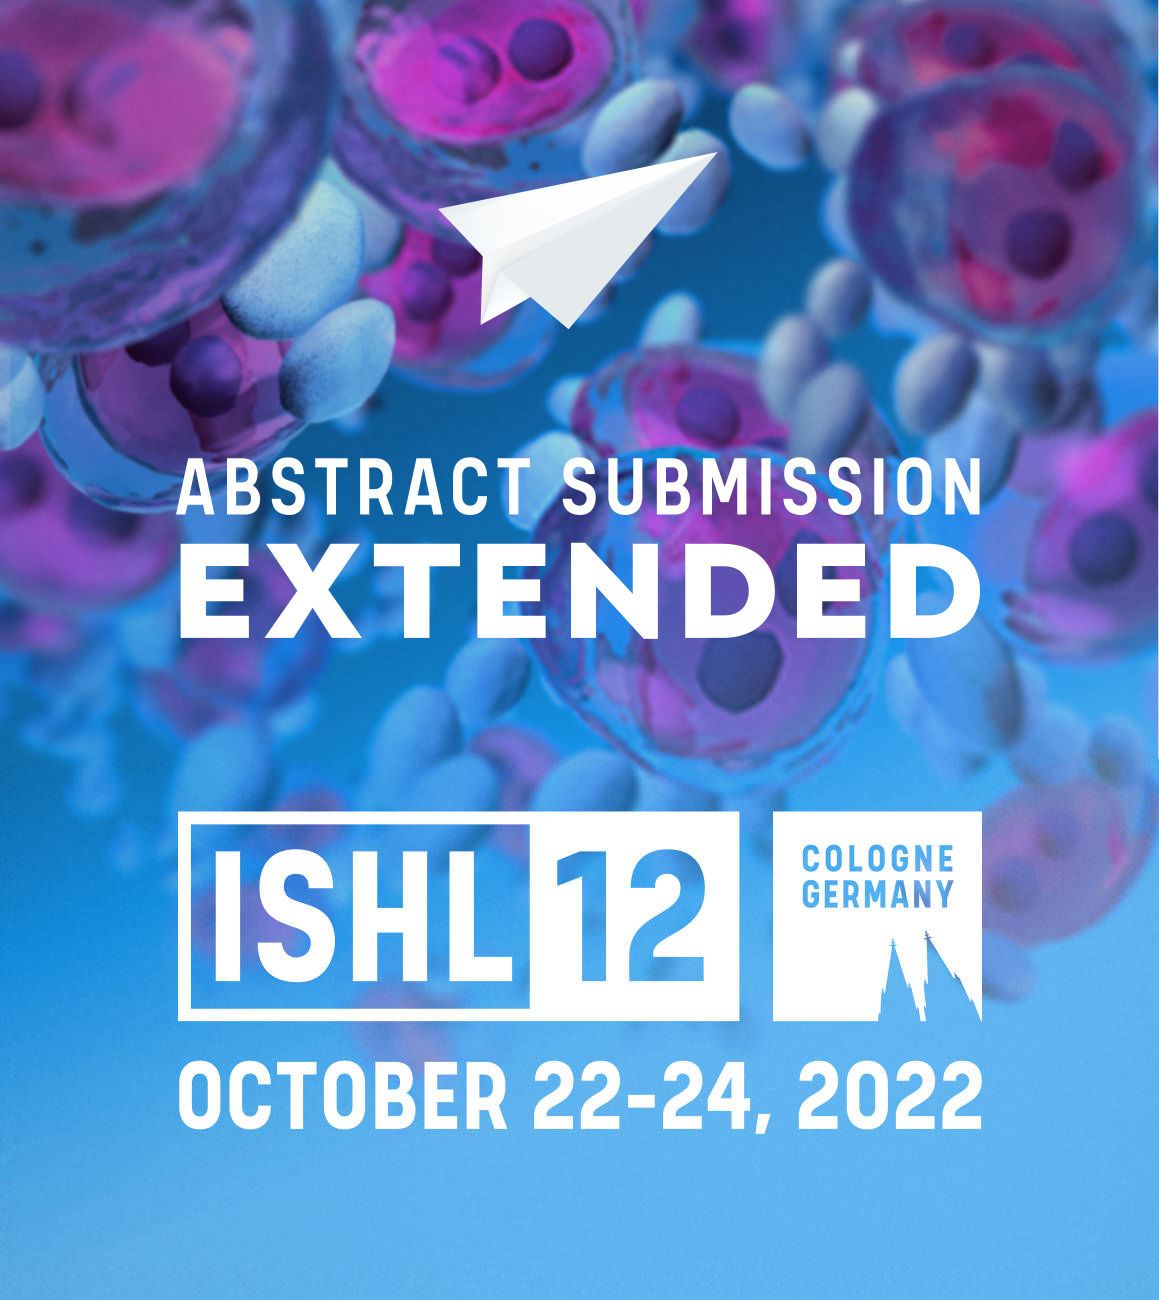 ISHL12 – Abstract Submission Extended